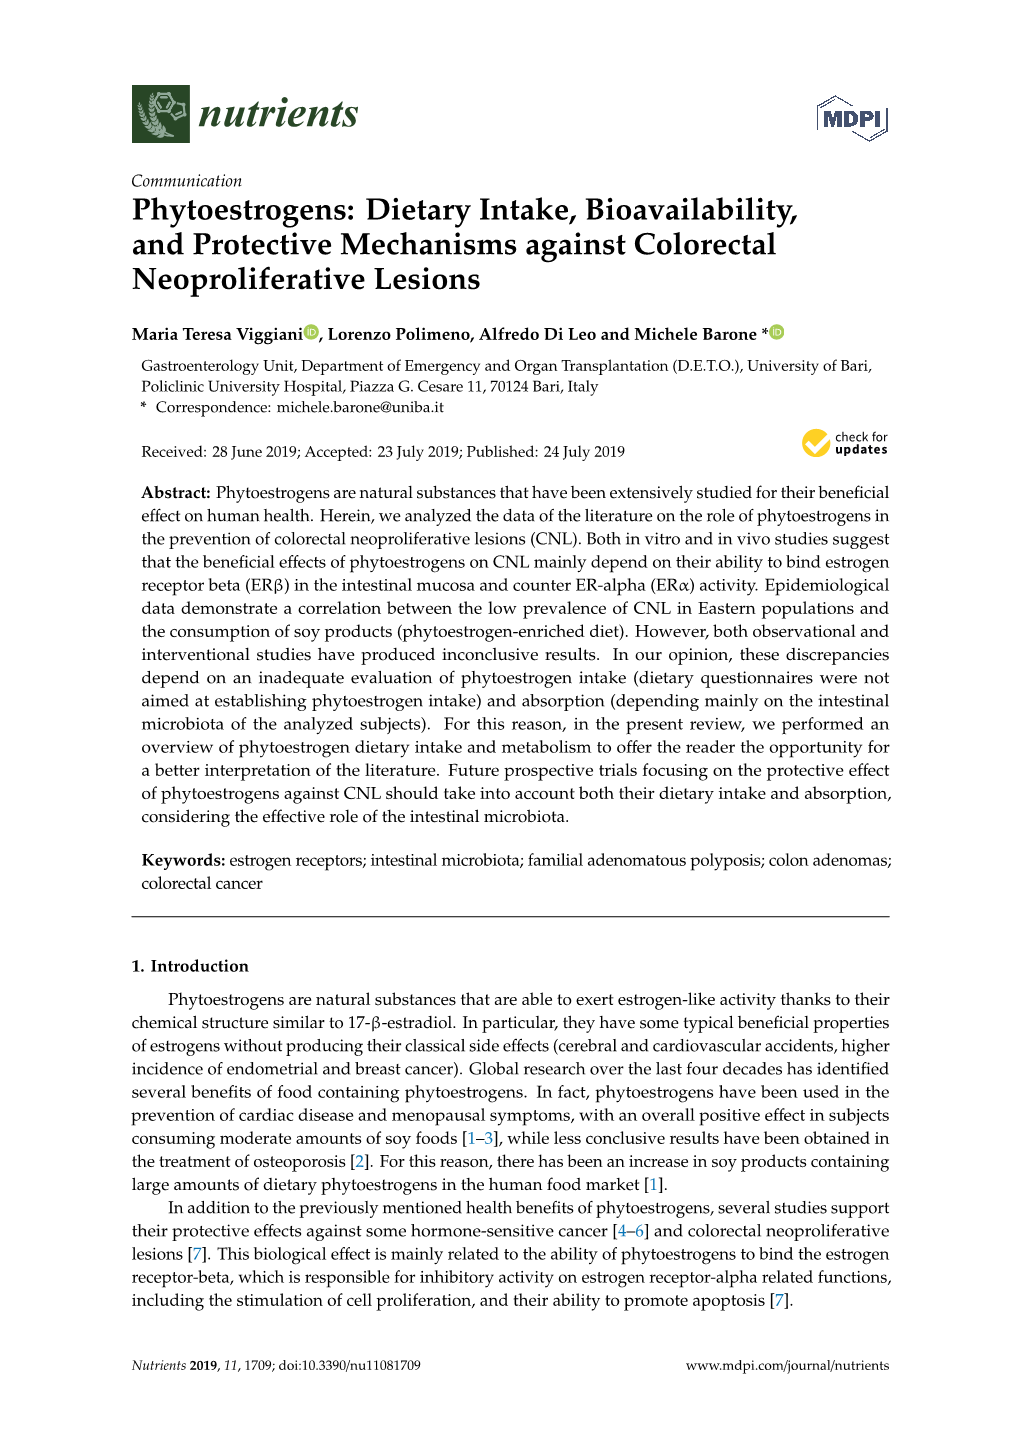 Phytoestrogens: Dietary Intake, Bioavailability, and Protective Mechanisms Against Colorectal Neoproliferative Lesions